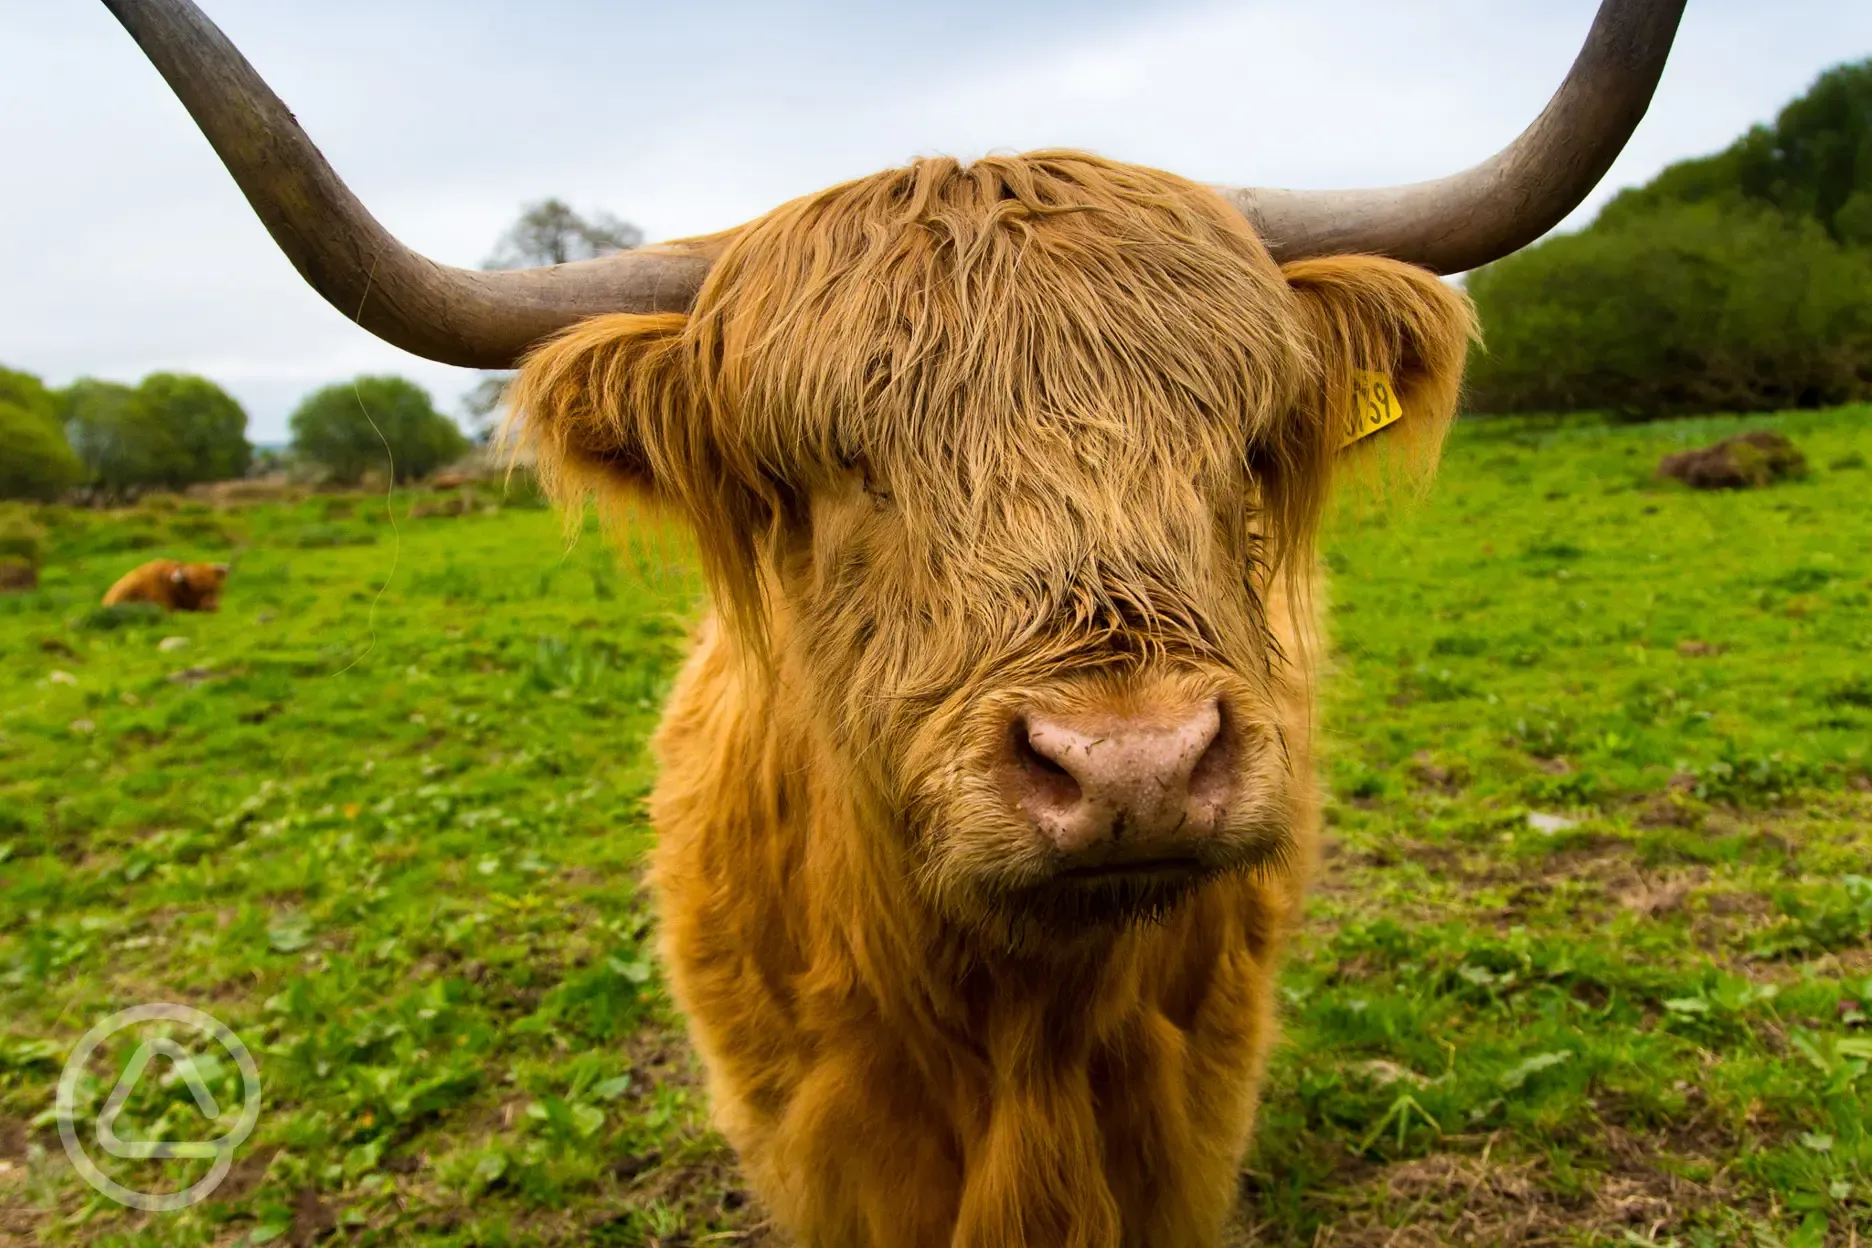 Nature Reserve conservation grazed by Highland Cows